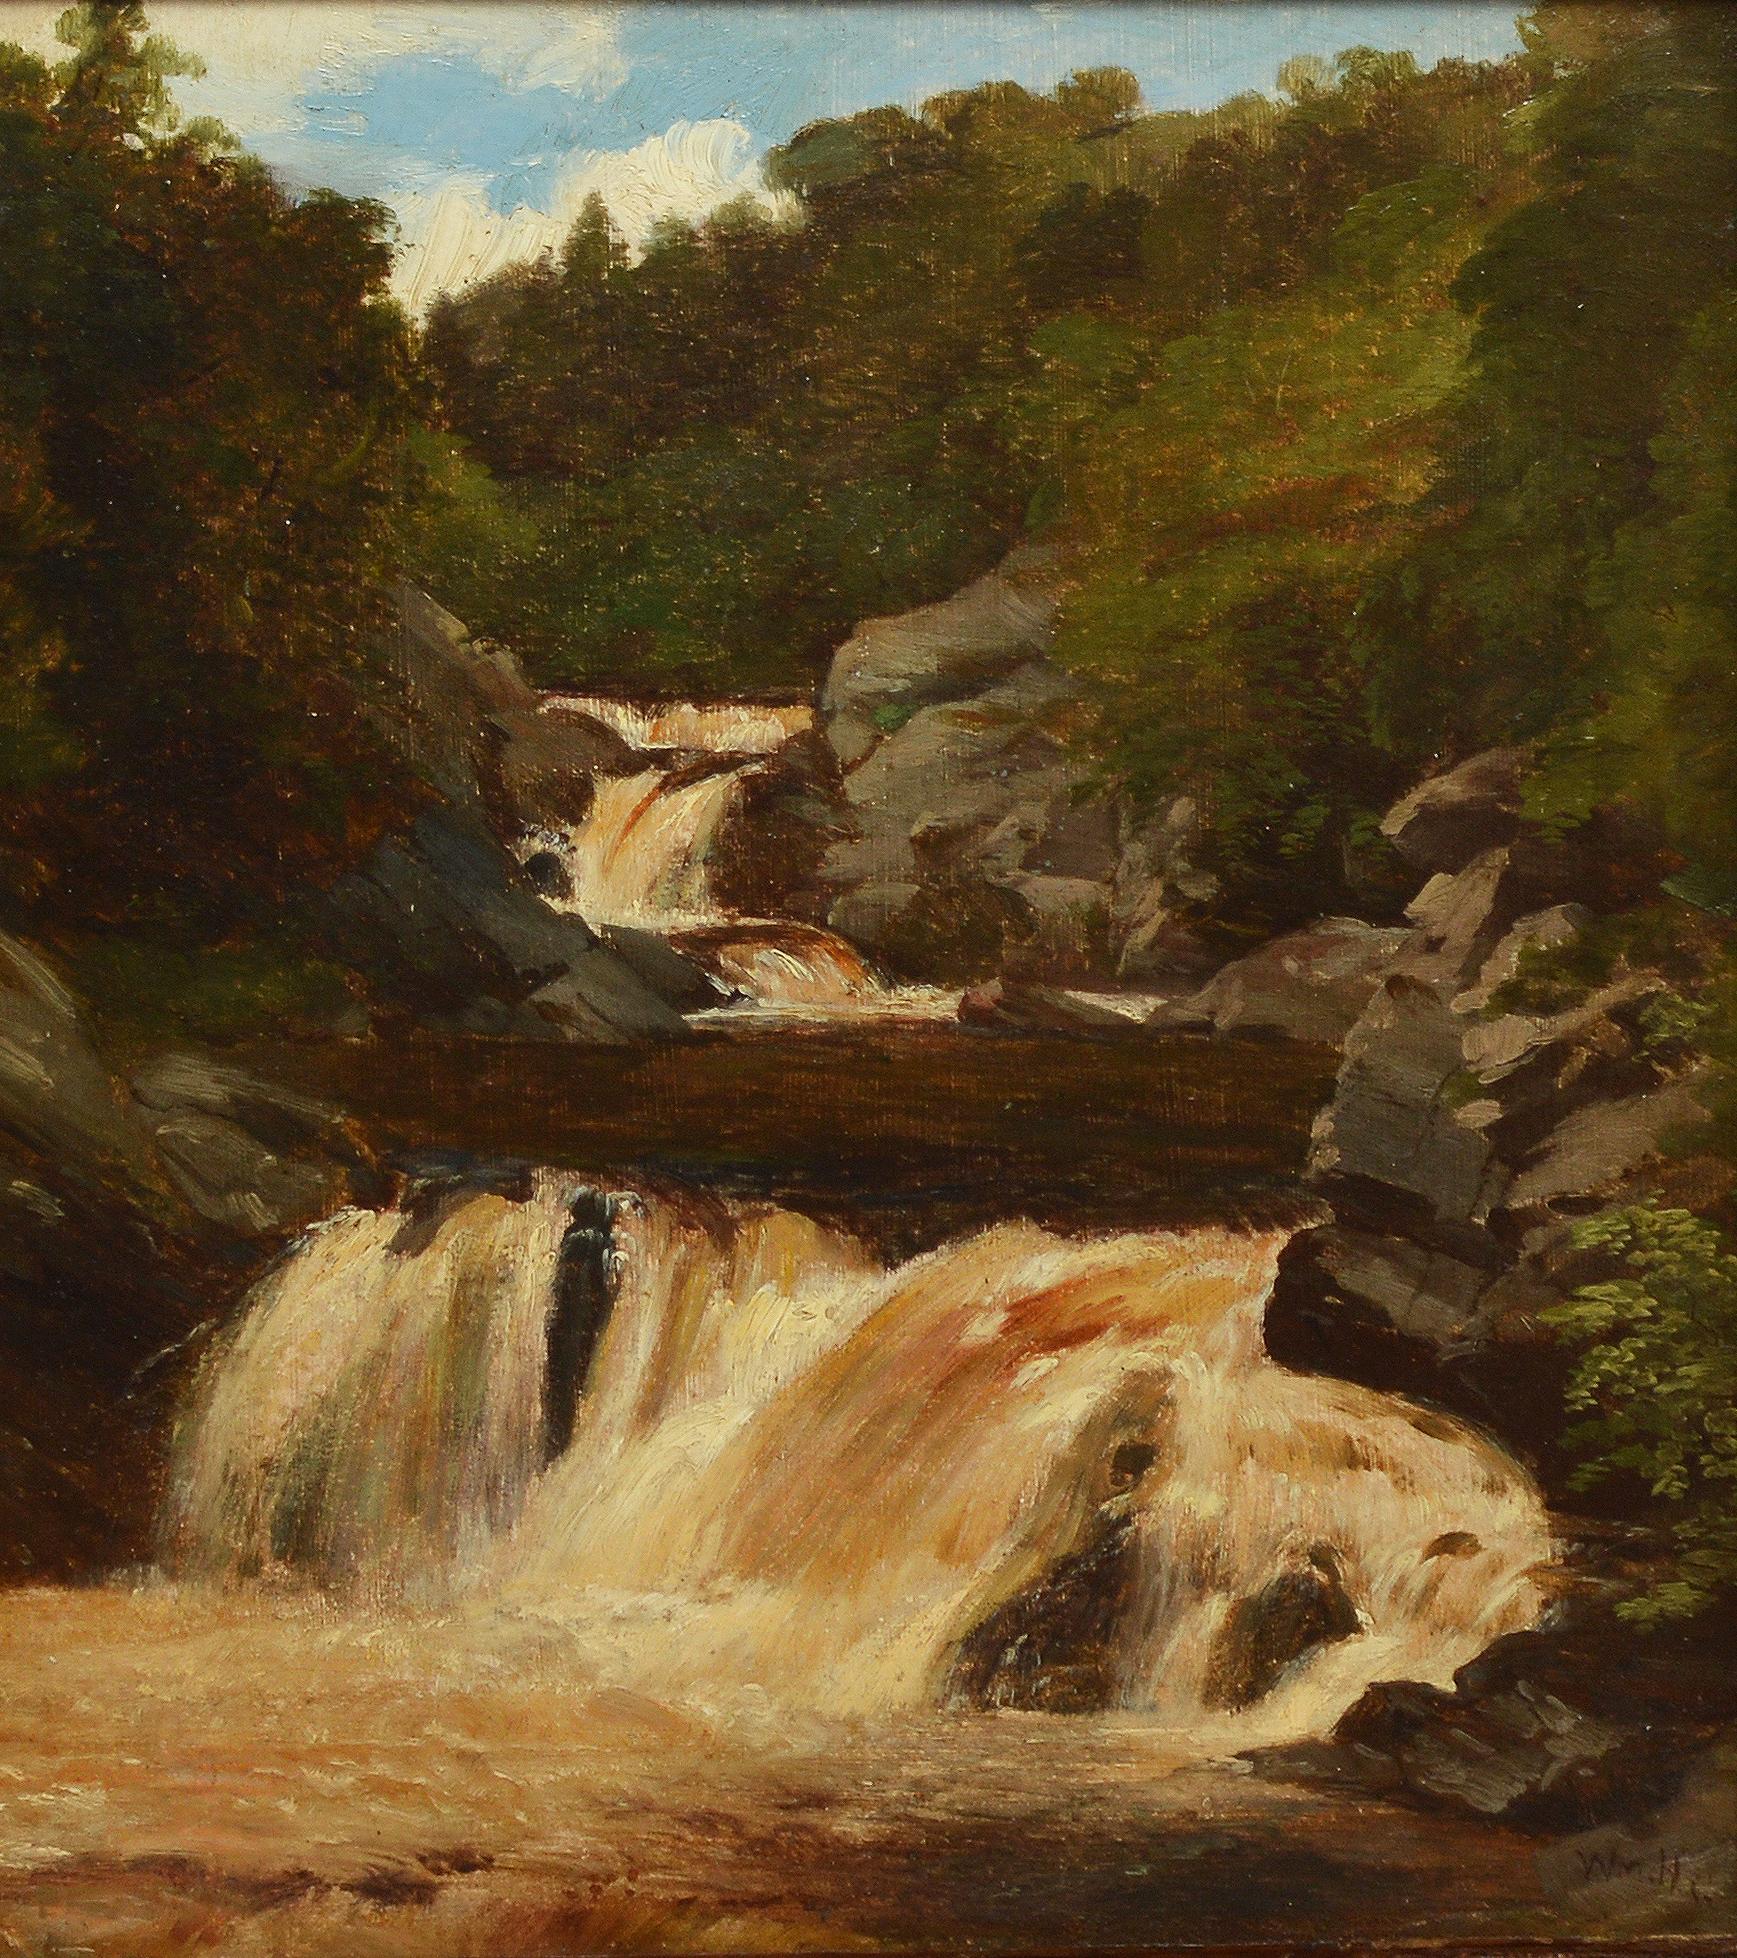 Hudson River School landscape with a waterfall by William Hart  (1823 - 1894).  Oil on canvas, circa 1850.  Signed lower right.  Displayed in a giltwood frame.  Image size, 11